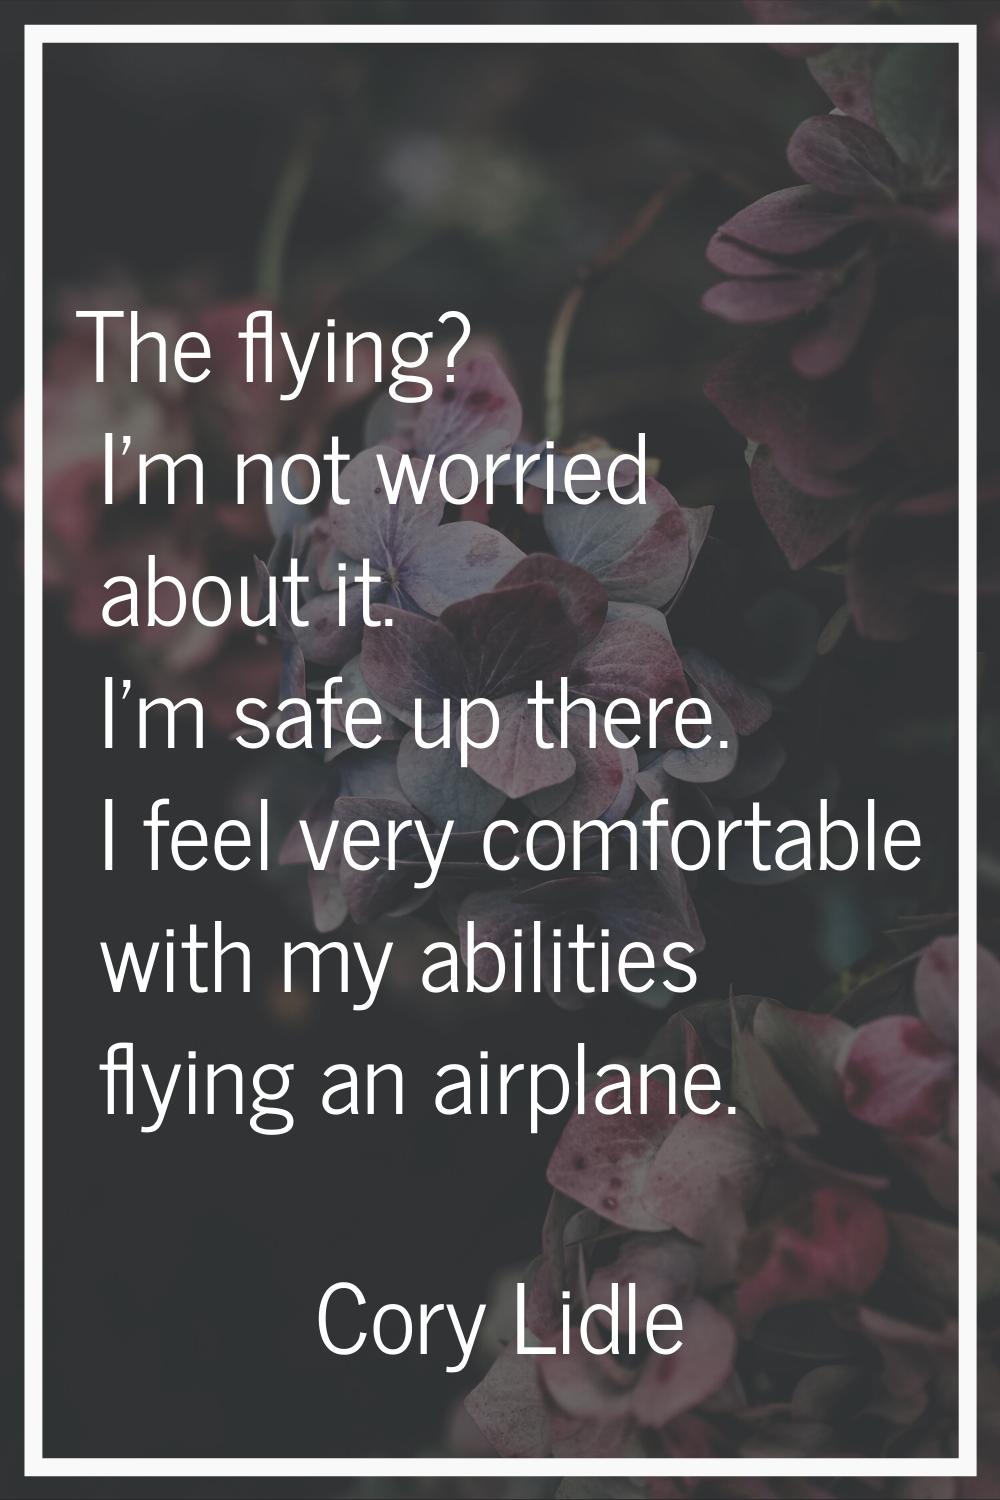 The flying? I'm not worried about it. I'm safe up there. I feel very comfortable with my abilities 